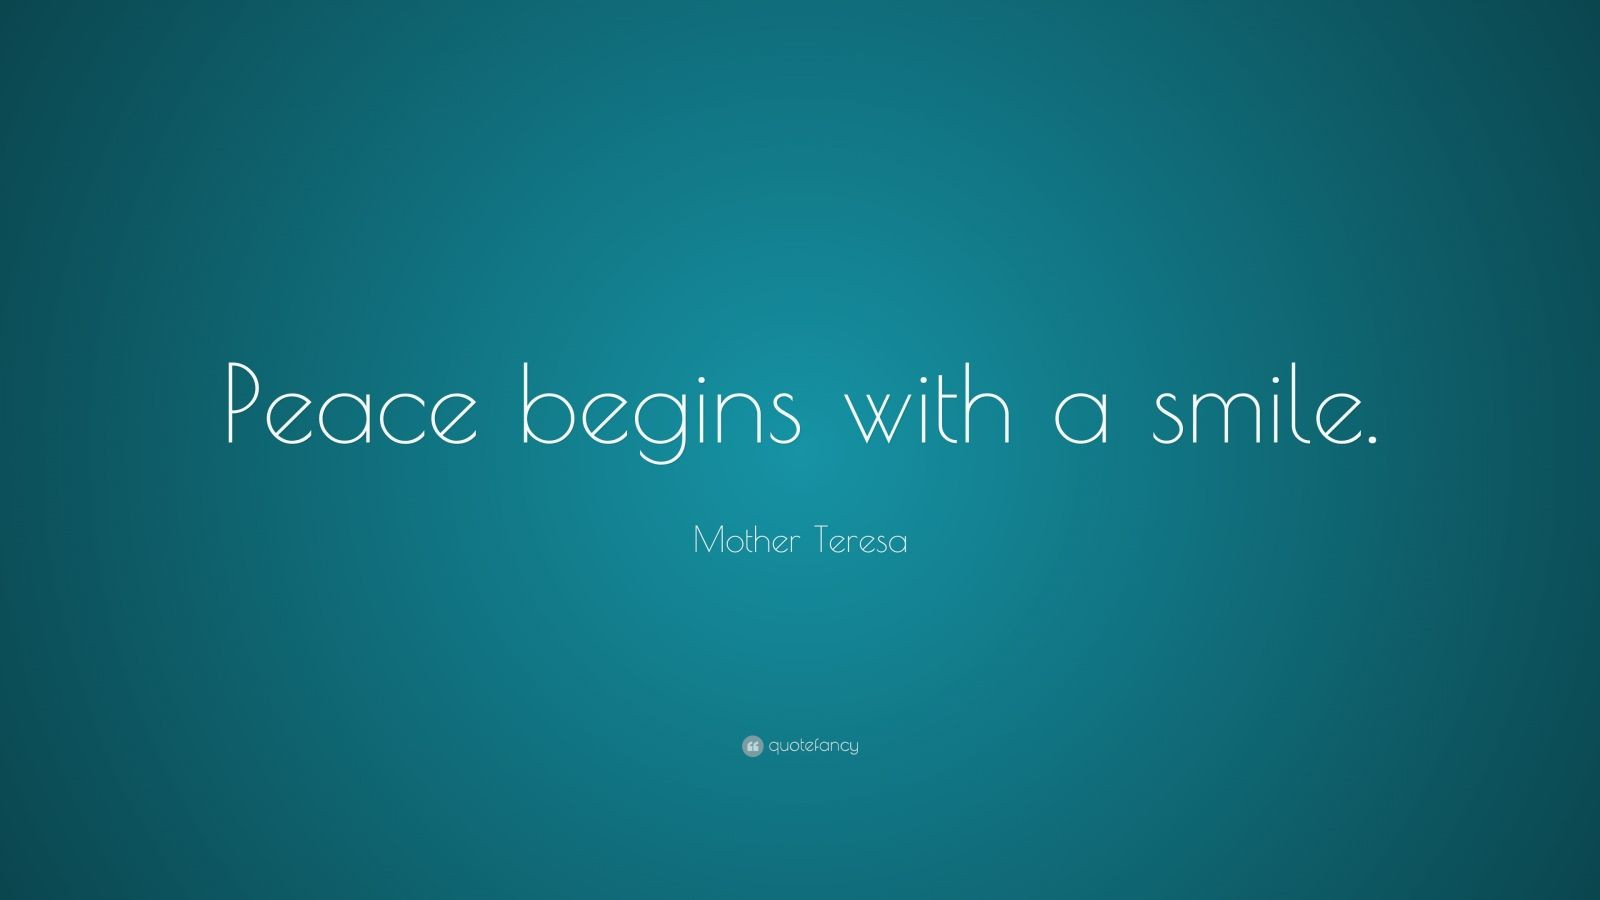 Mother Teresa Peace Quote
 Mother Teresa Quotes 12 wallpapers Quotefancy